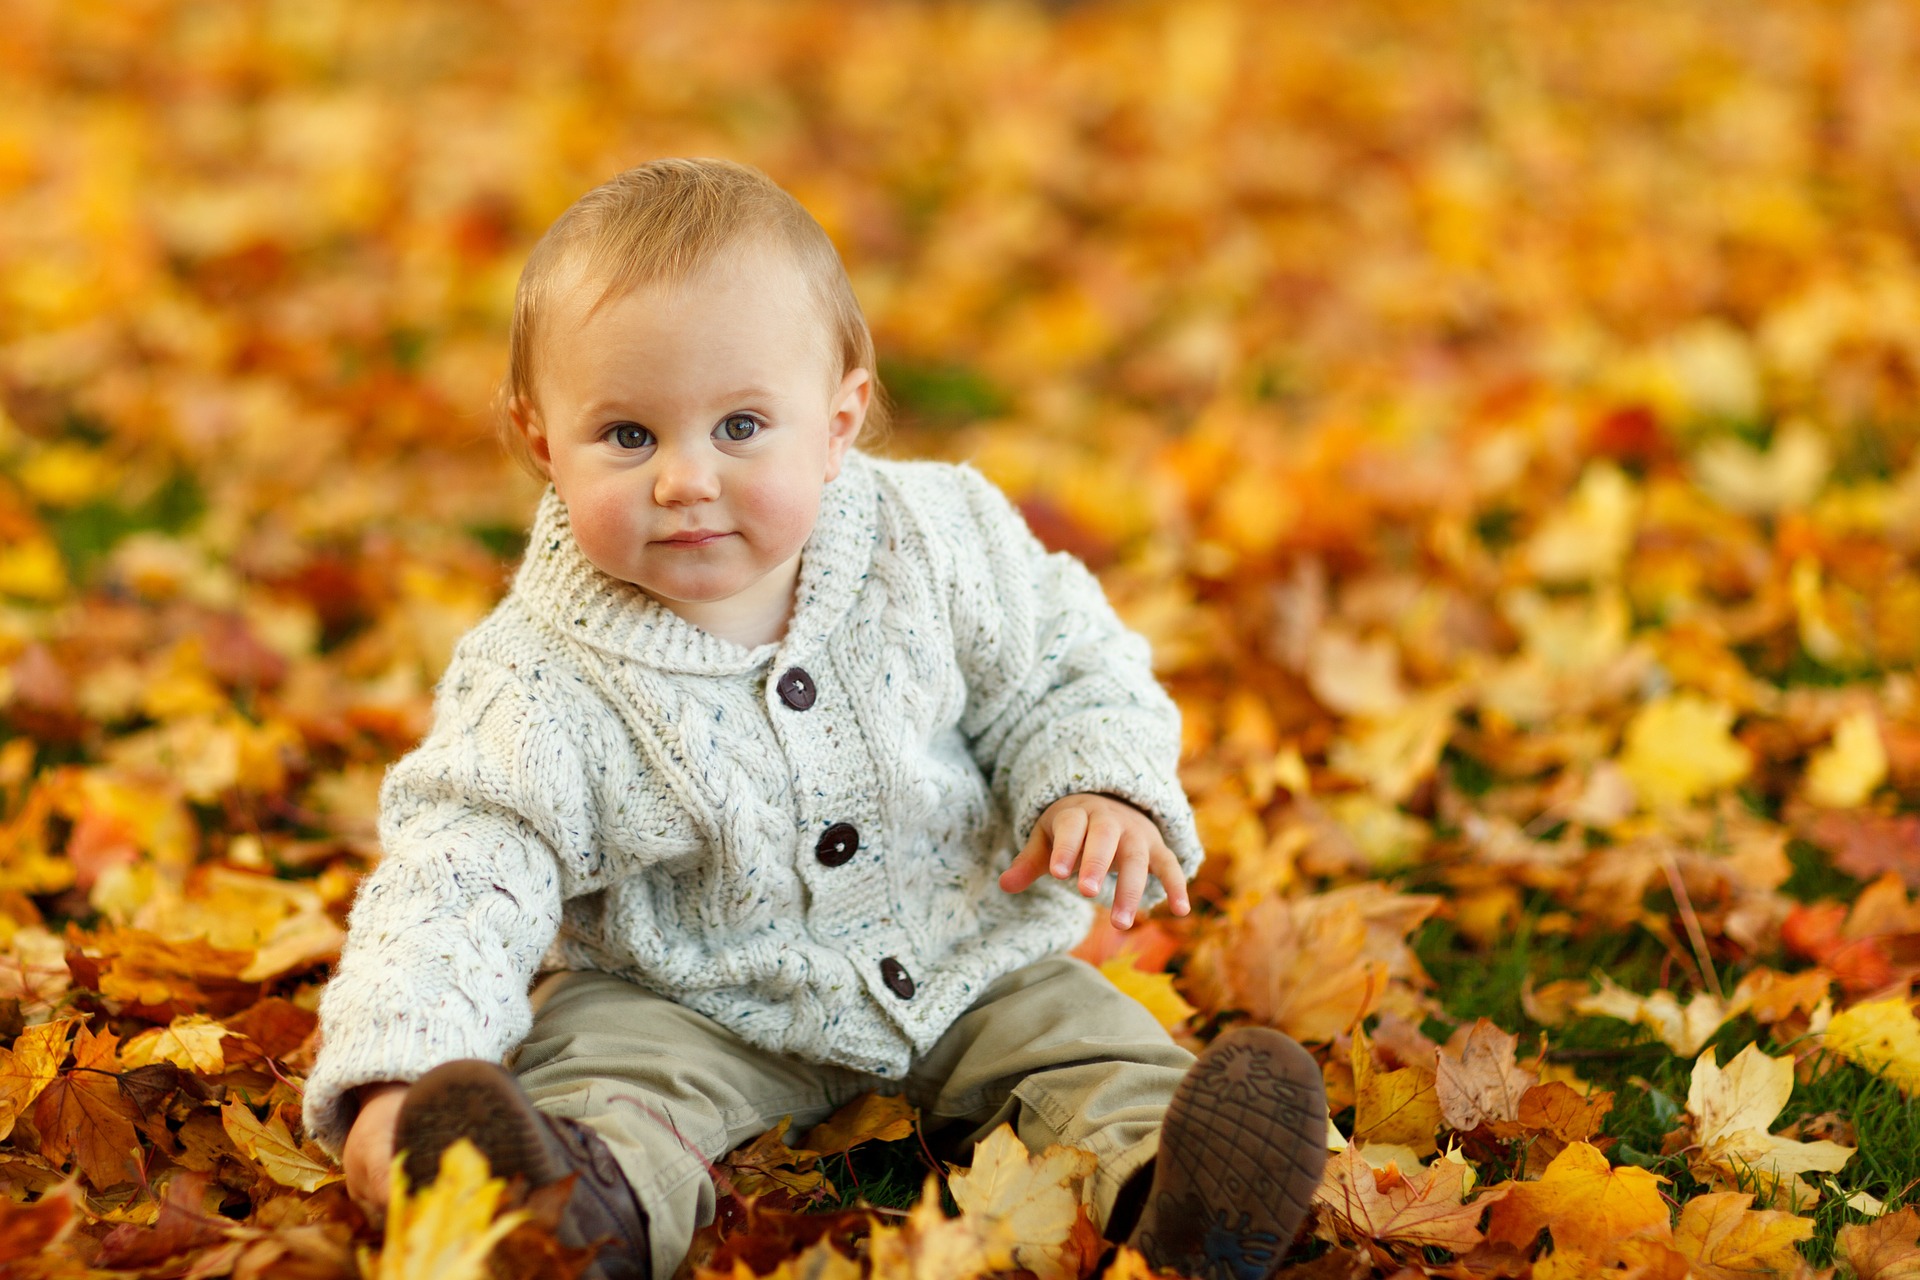 How can I keep my baby healthy through weather changes?